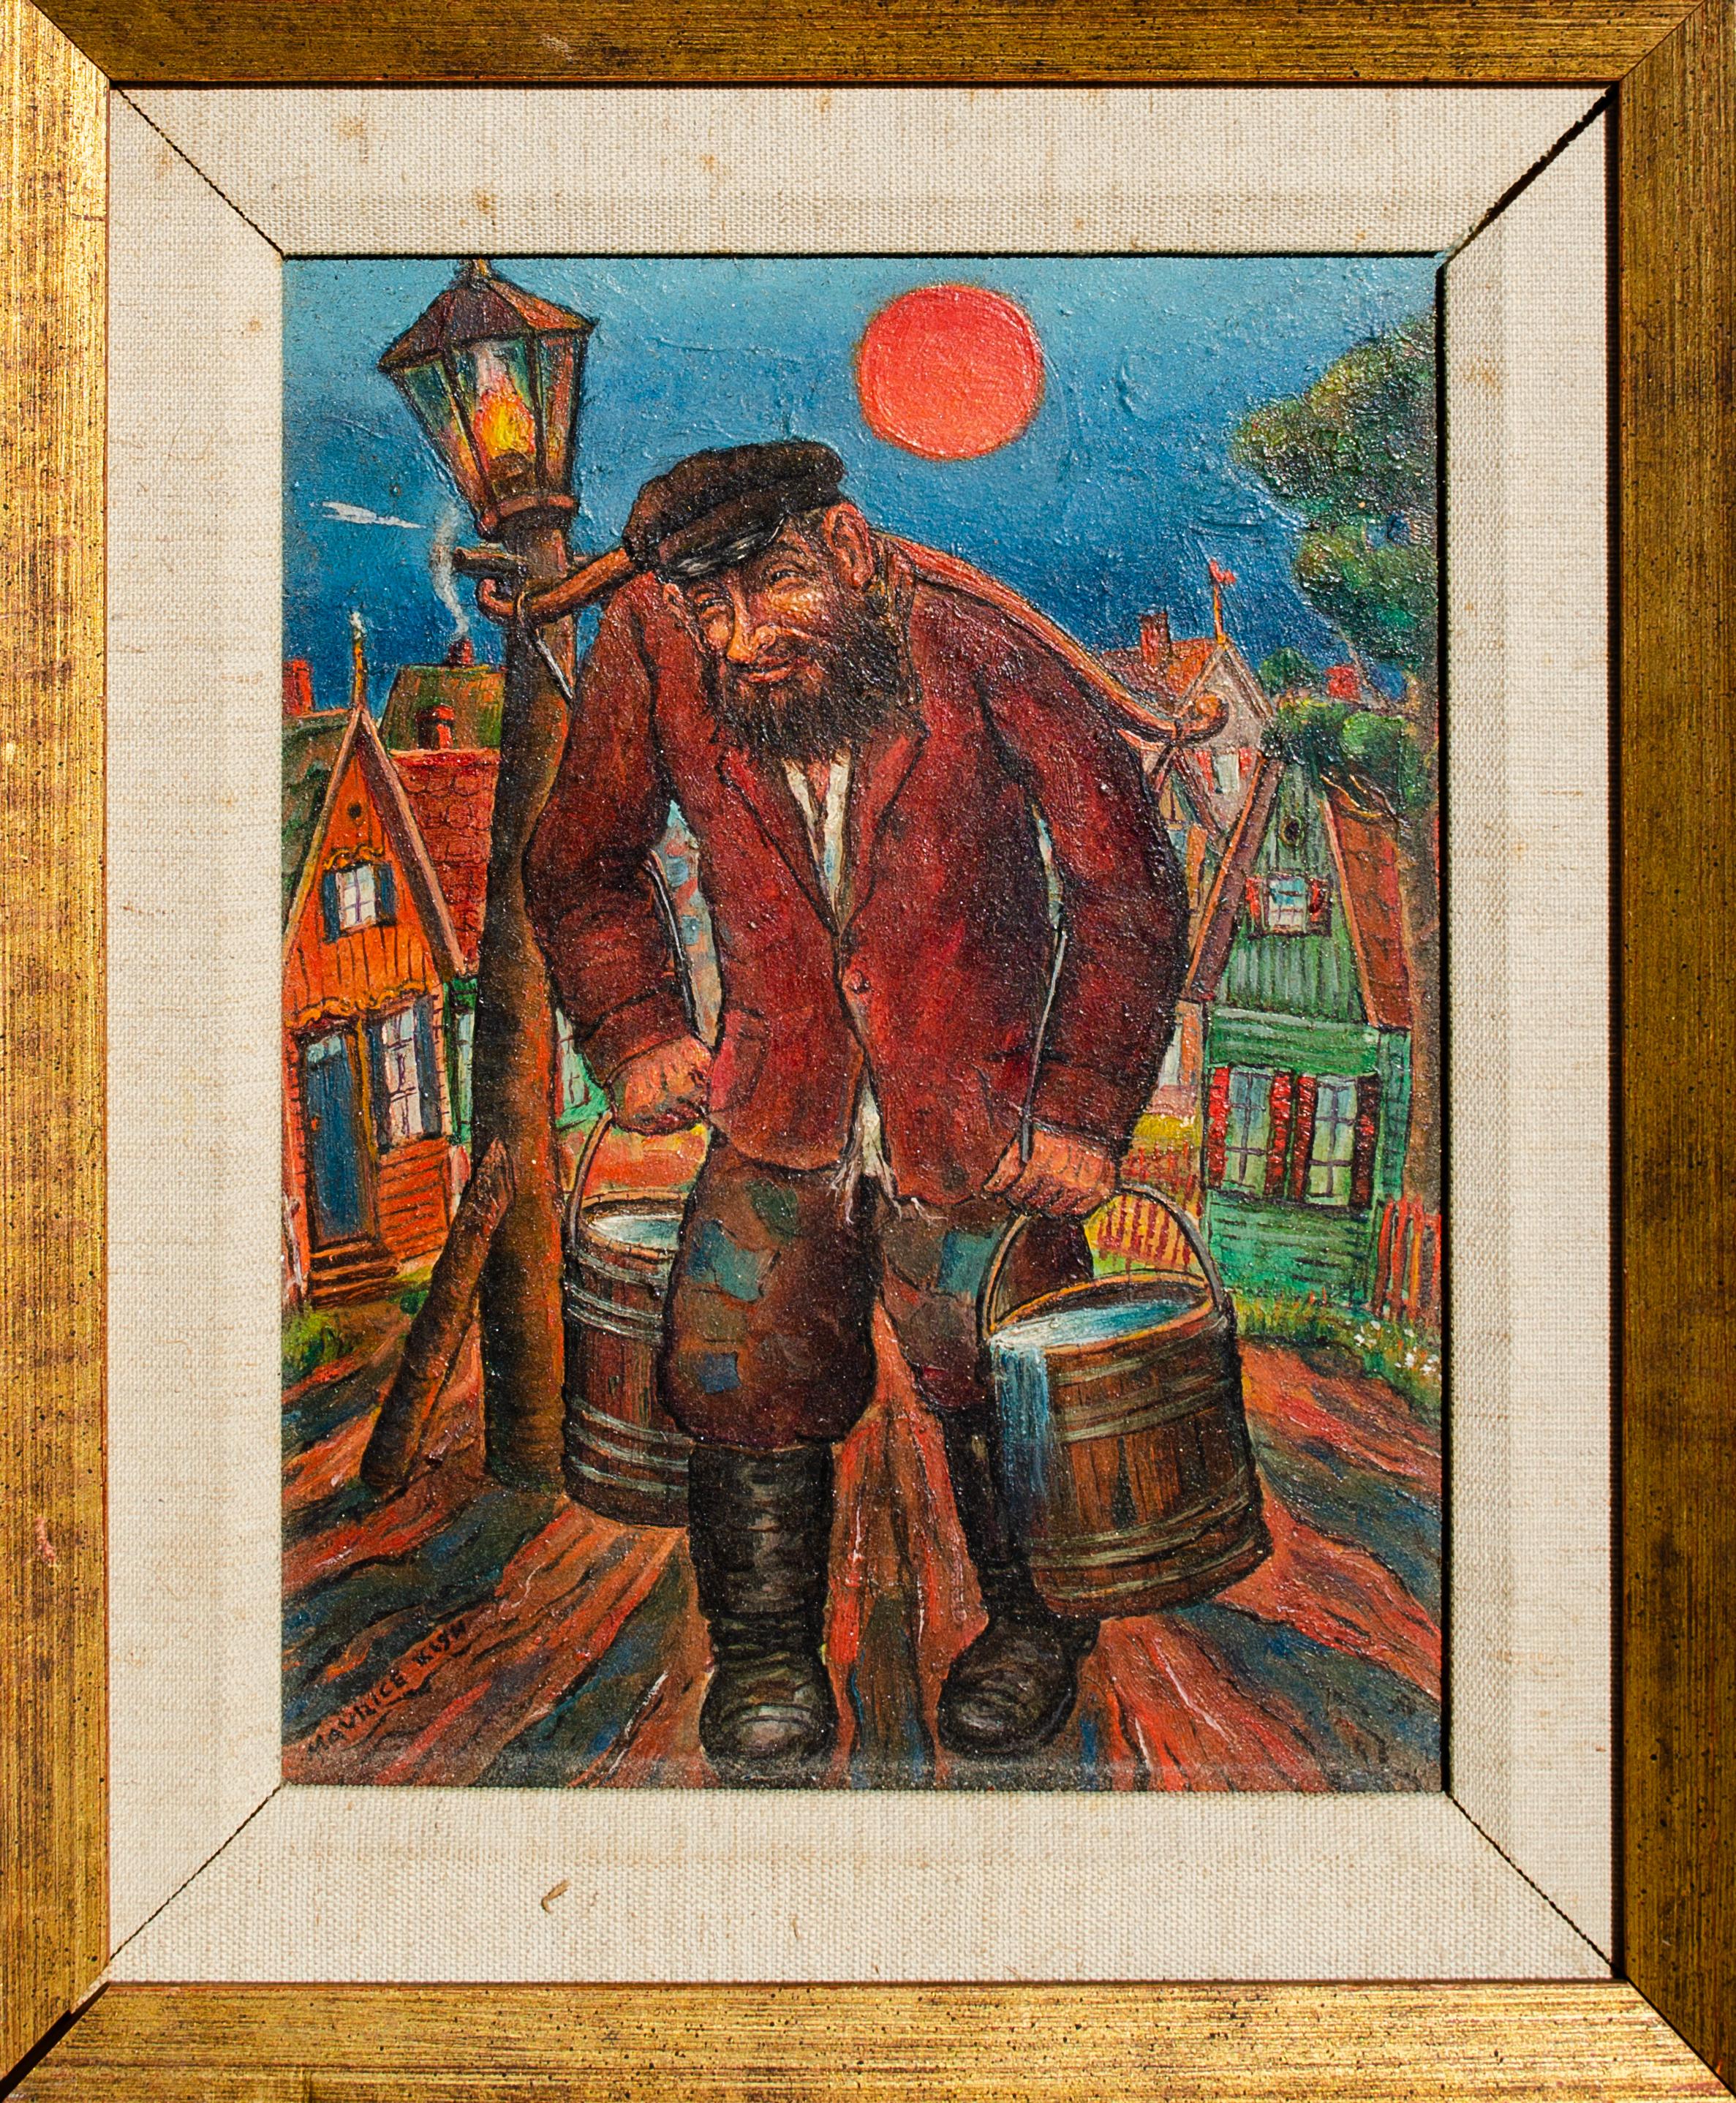 Framed Maurice Kish (American, 1895-1987) 
Genre painting of a man carrying water buckets
Signed lower left: Maurice Kish
Framed dimensions: 12 1/8 x 9 1/8 in.

Maurice Kish, painter and poet, was born in Dvinsk, Russia (also known as Denenburg